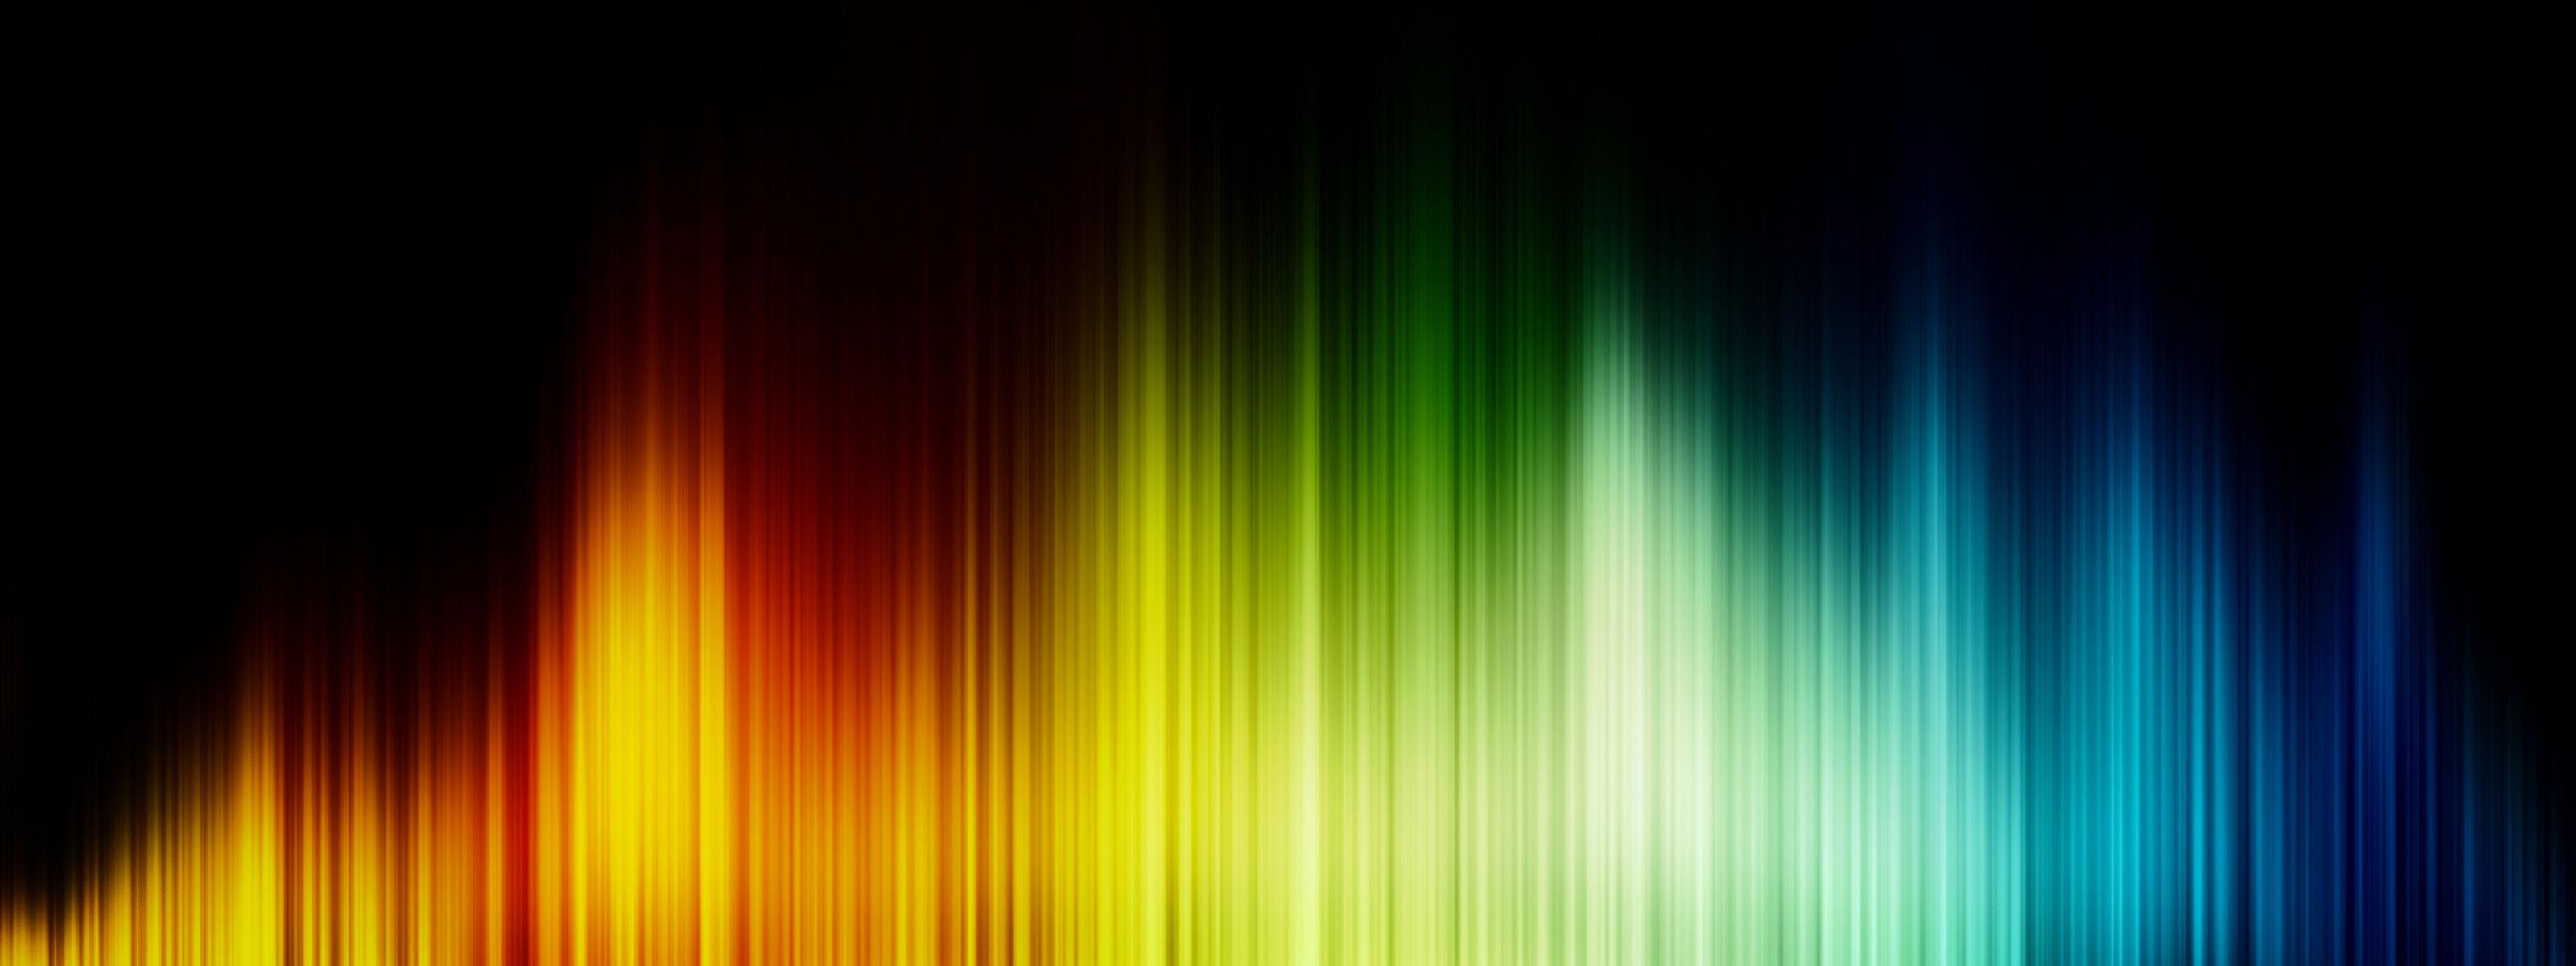 Abstract Colorful Dual Screen Wallpaper | 3200x1200 | ID:38371